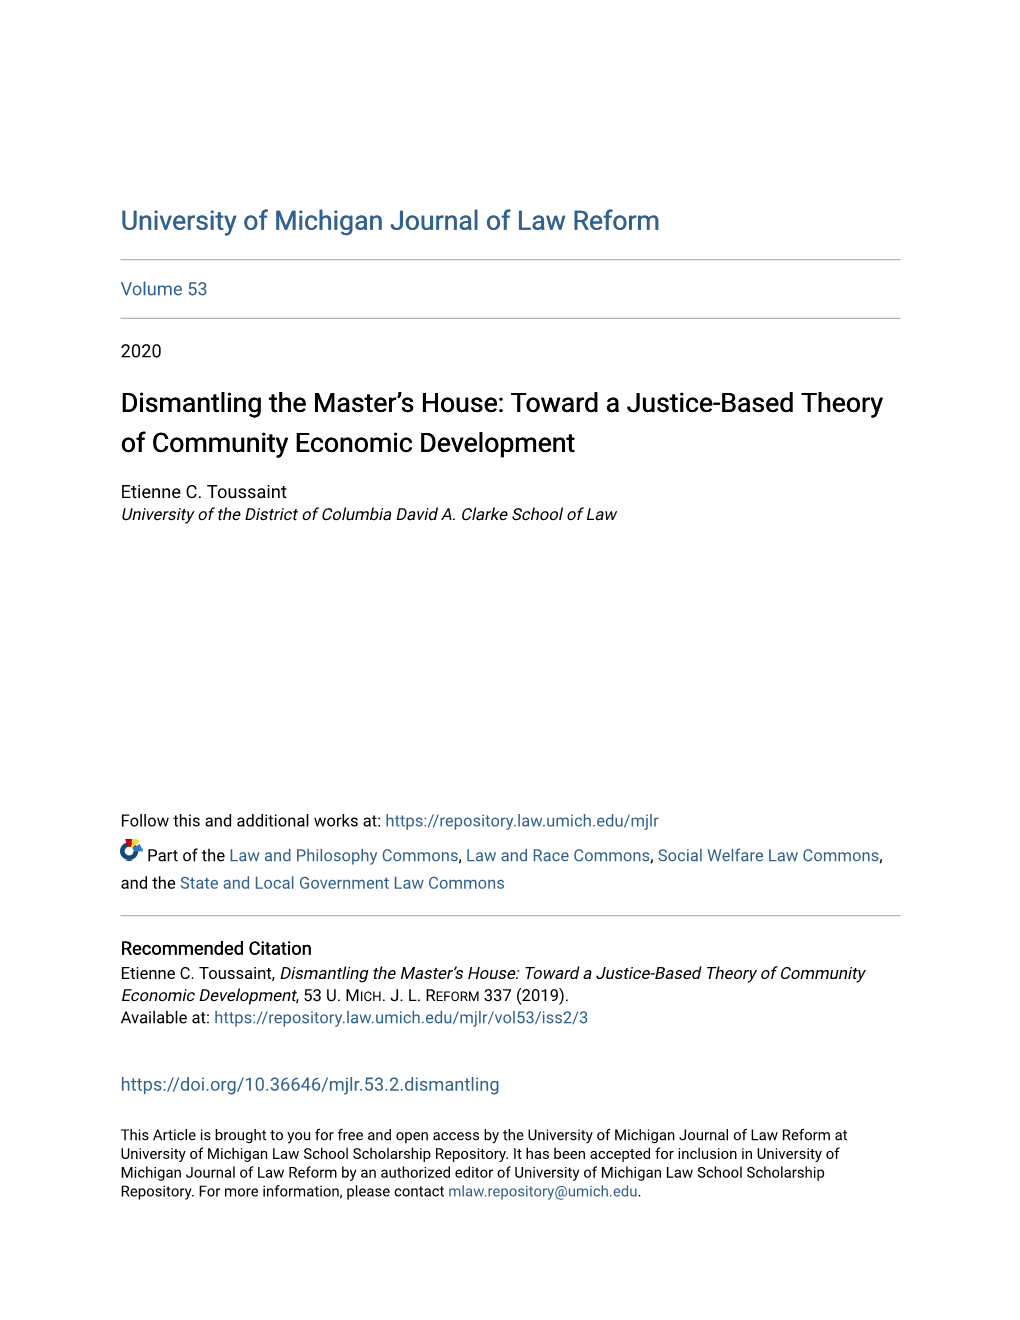 Toward a Justice-Based Theory of Community Economic Development